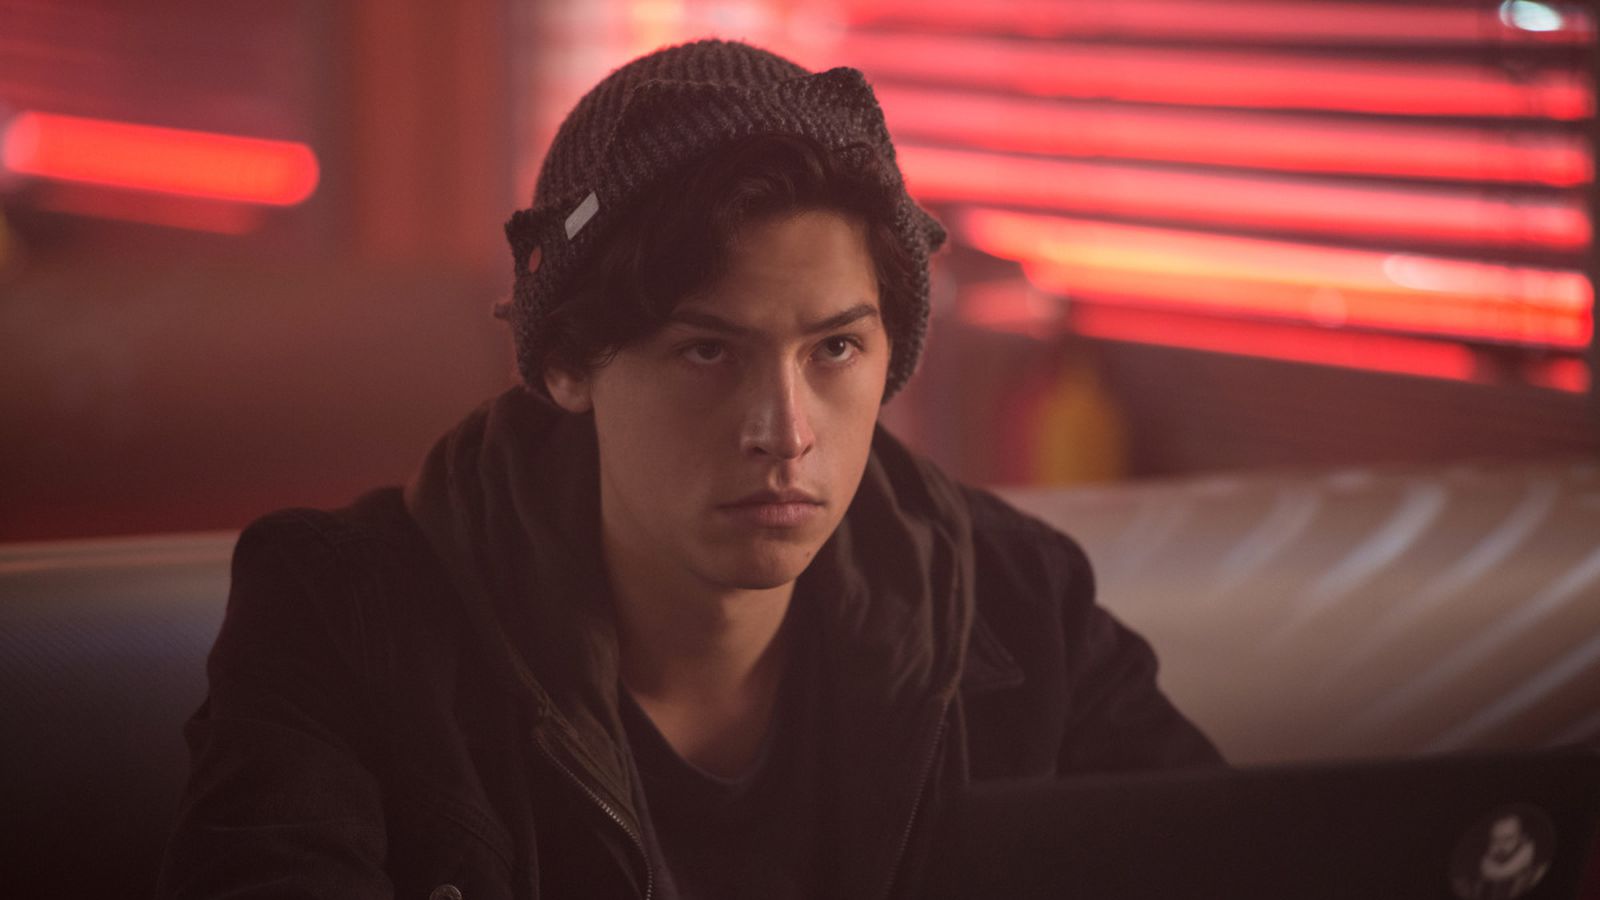 The Jughead 'I’m weird' meme might never run out of fuel.